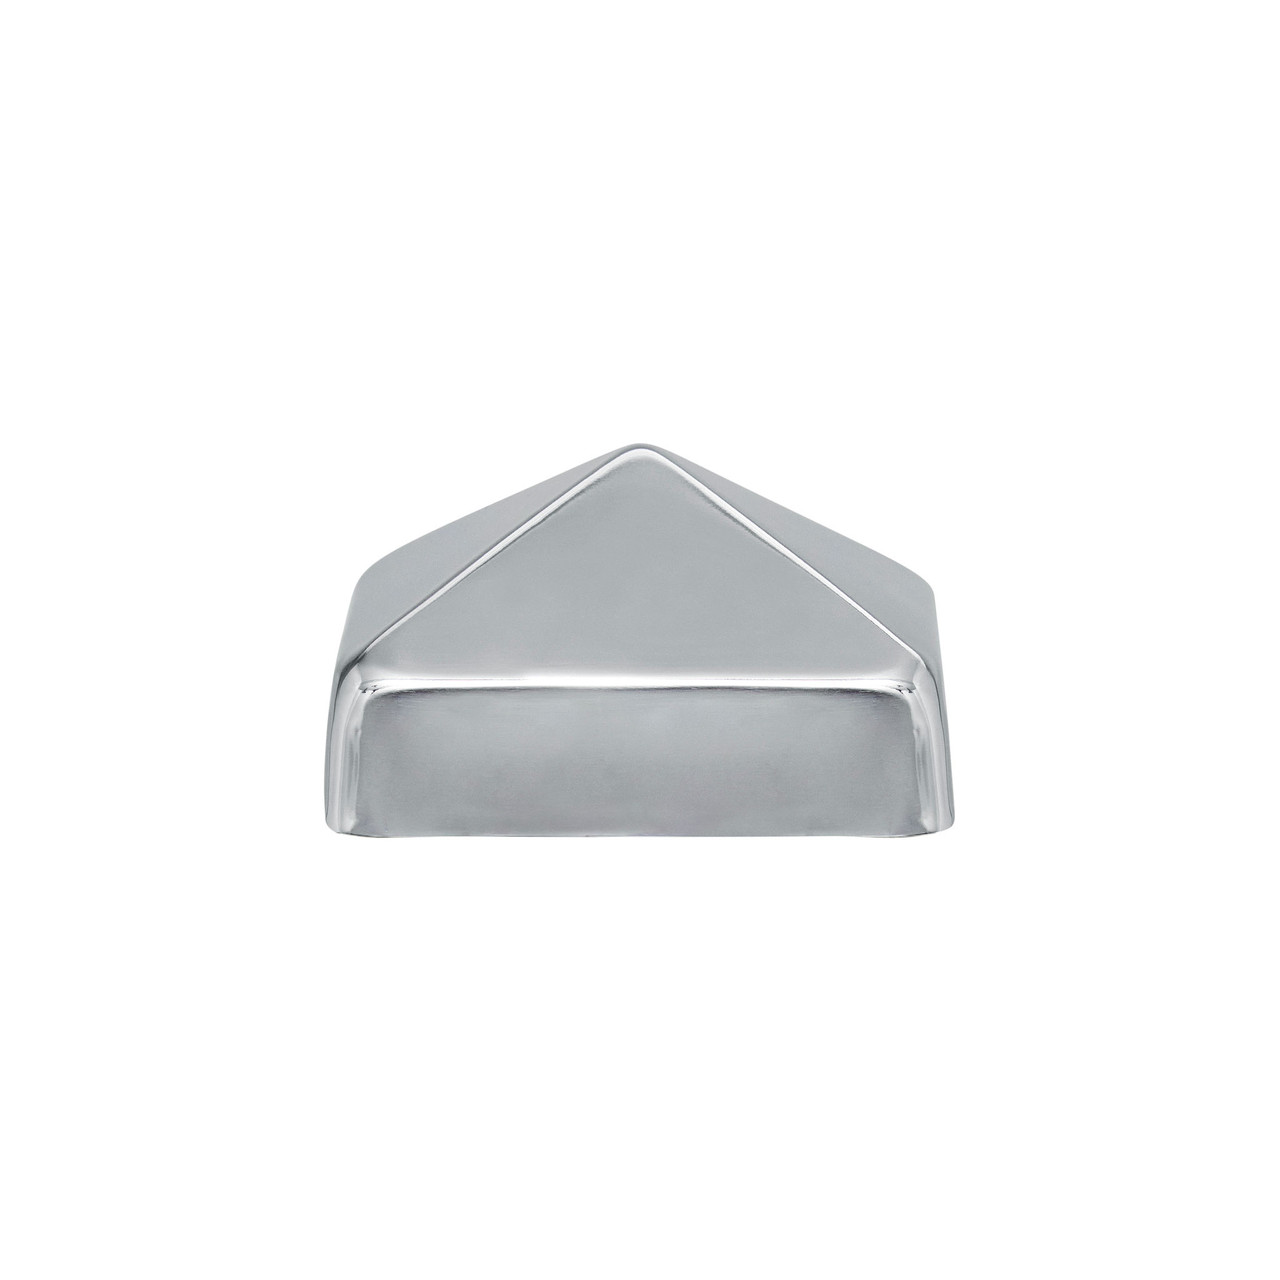 Stainless Steel Pyramid Fence Post Caps sit directly on top of your fence or deck posts and provide decades of protection from the weather. Our 20-gauge Steel Pyramid Post Caps come in 4x4, FULL 4x4, 4x6, 5x5, 6x6, FULL 6x6, and 8x8 inch sizes.